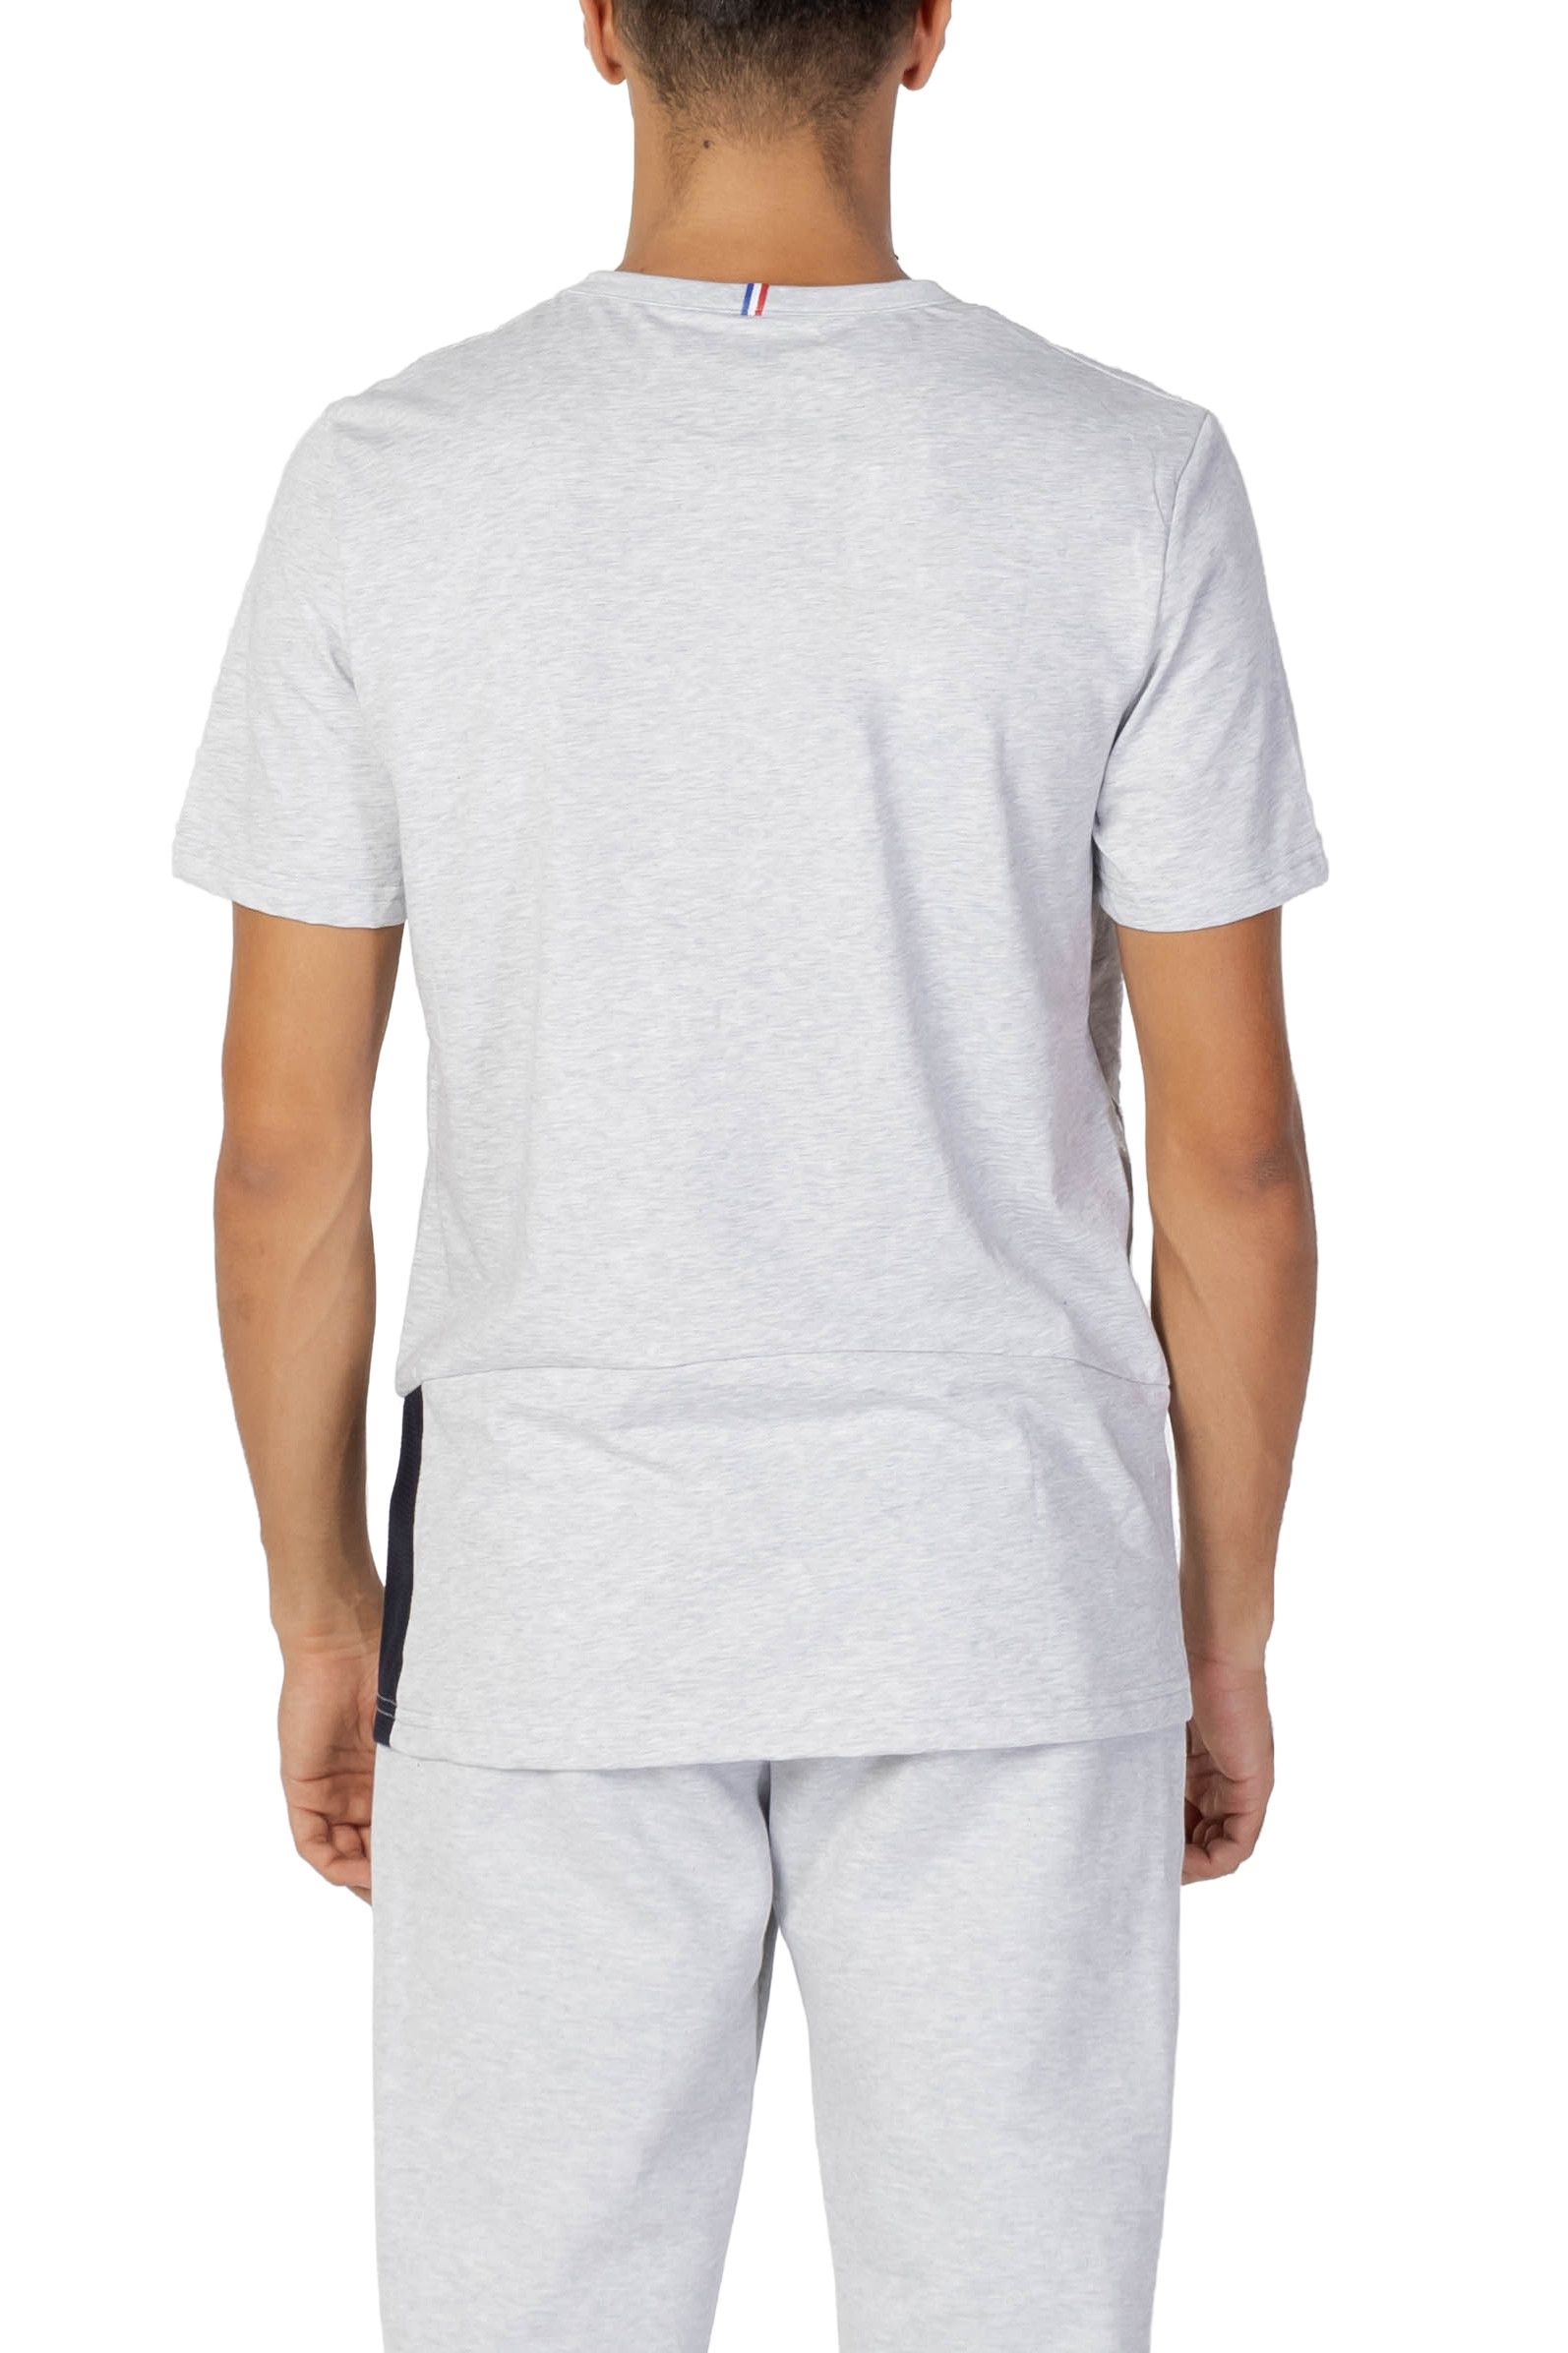 Brand: Le Coq Sportif
Gender: Men
Type: T-shirts
Season: Fall/Winter

PRODUCT DETAIL
• Color: grey
• Pattern: plain
• Sleeves: short
• Neckline: round neck

COMPOSITION AND MATERIAL
• Composition: -100% cotton 
•  Washing: machine wash at 30°